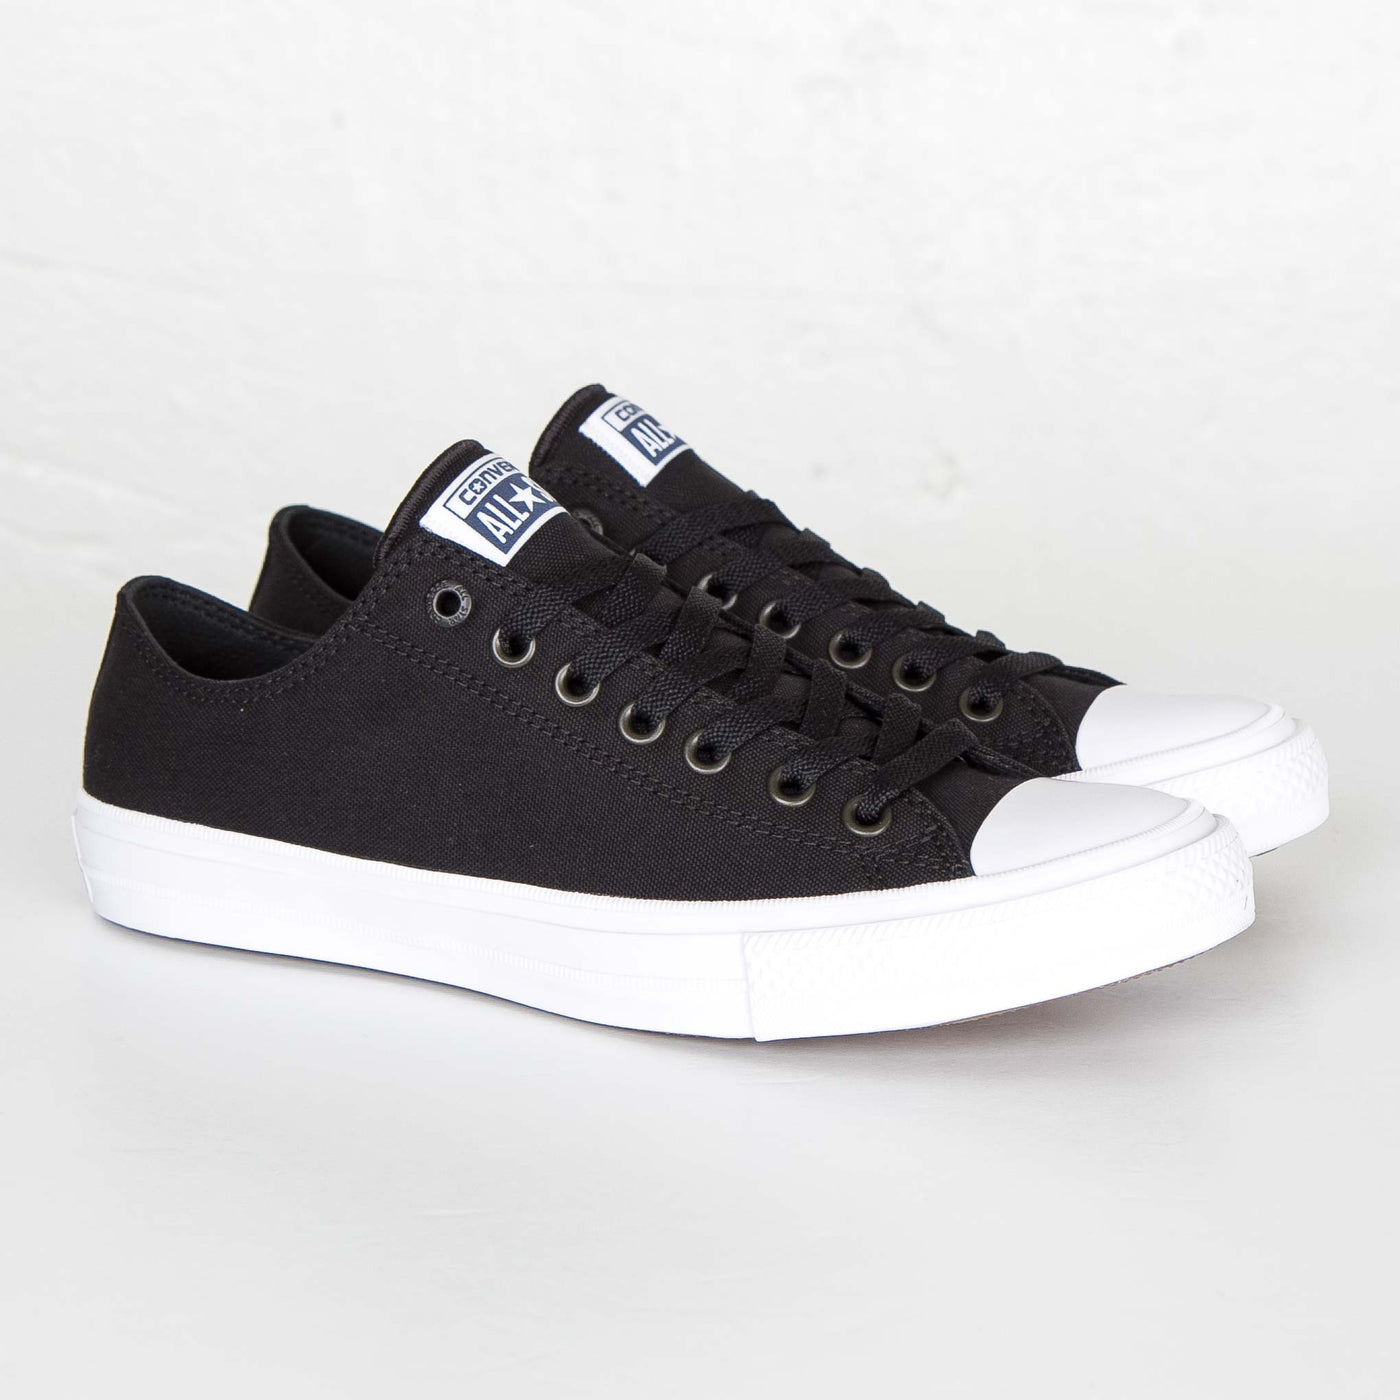 Converse Chuck Taylor All Star II OX Low Top Black PRIVATE SNEAKERS